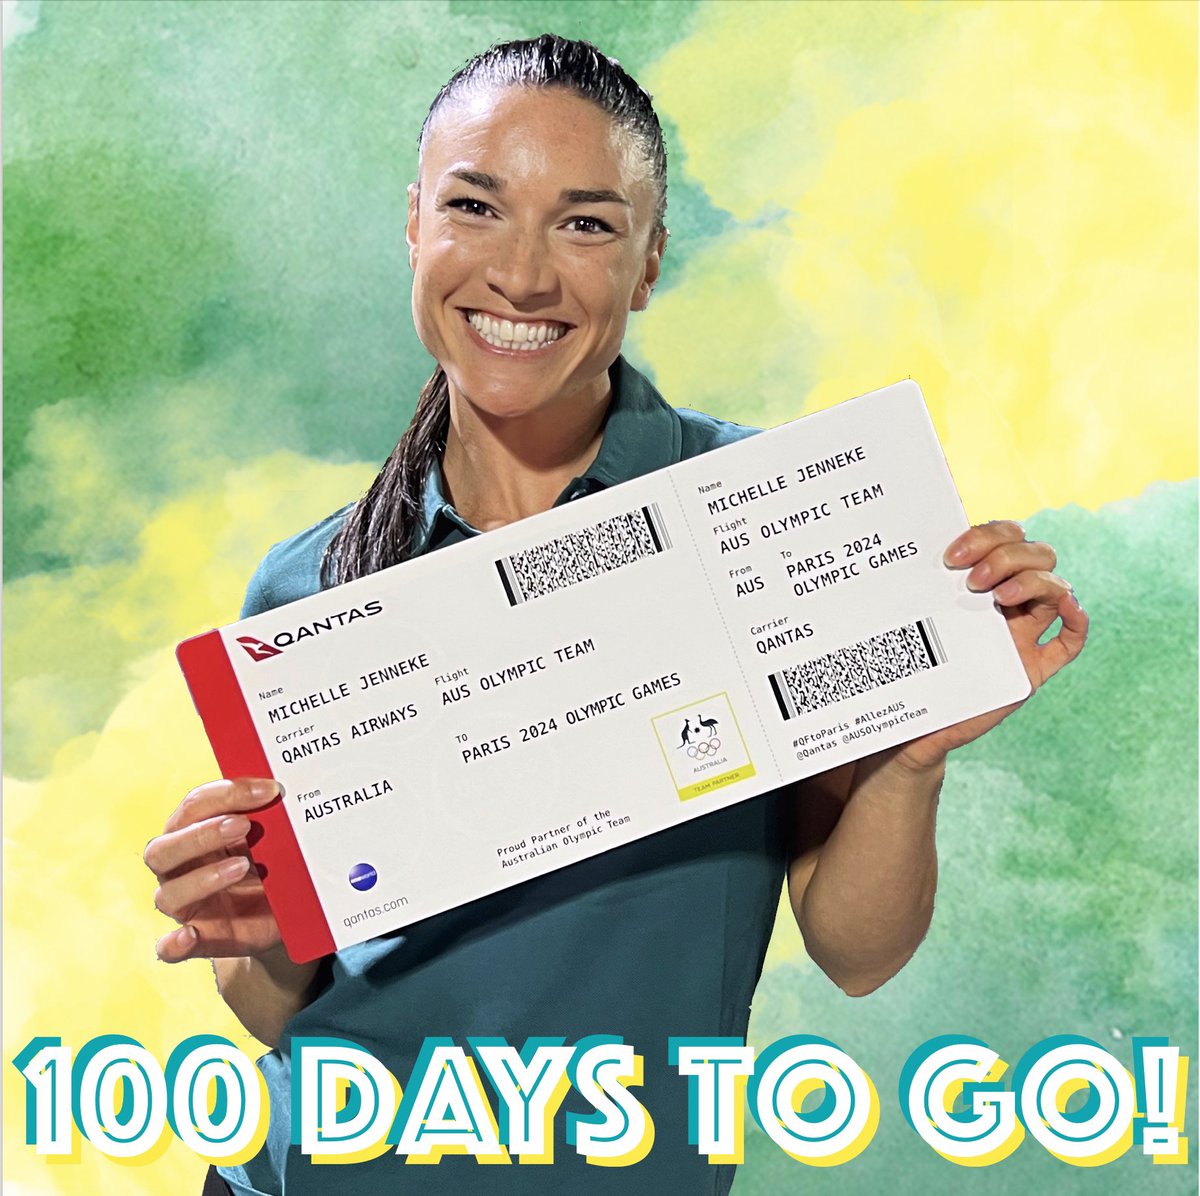 100 days until the Olympics kick off in Paris! Got my ticket and ready to go 😁🇦🇺 #QFtoParis #AllezAus @Qantas @AUSOlympicTeam